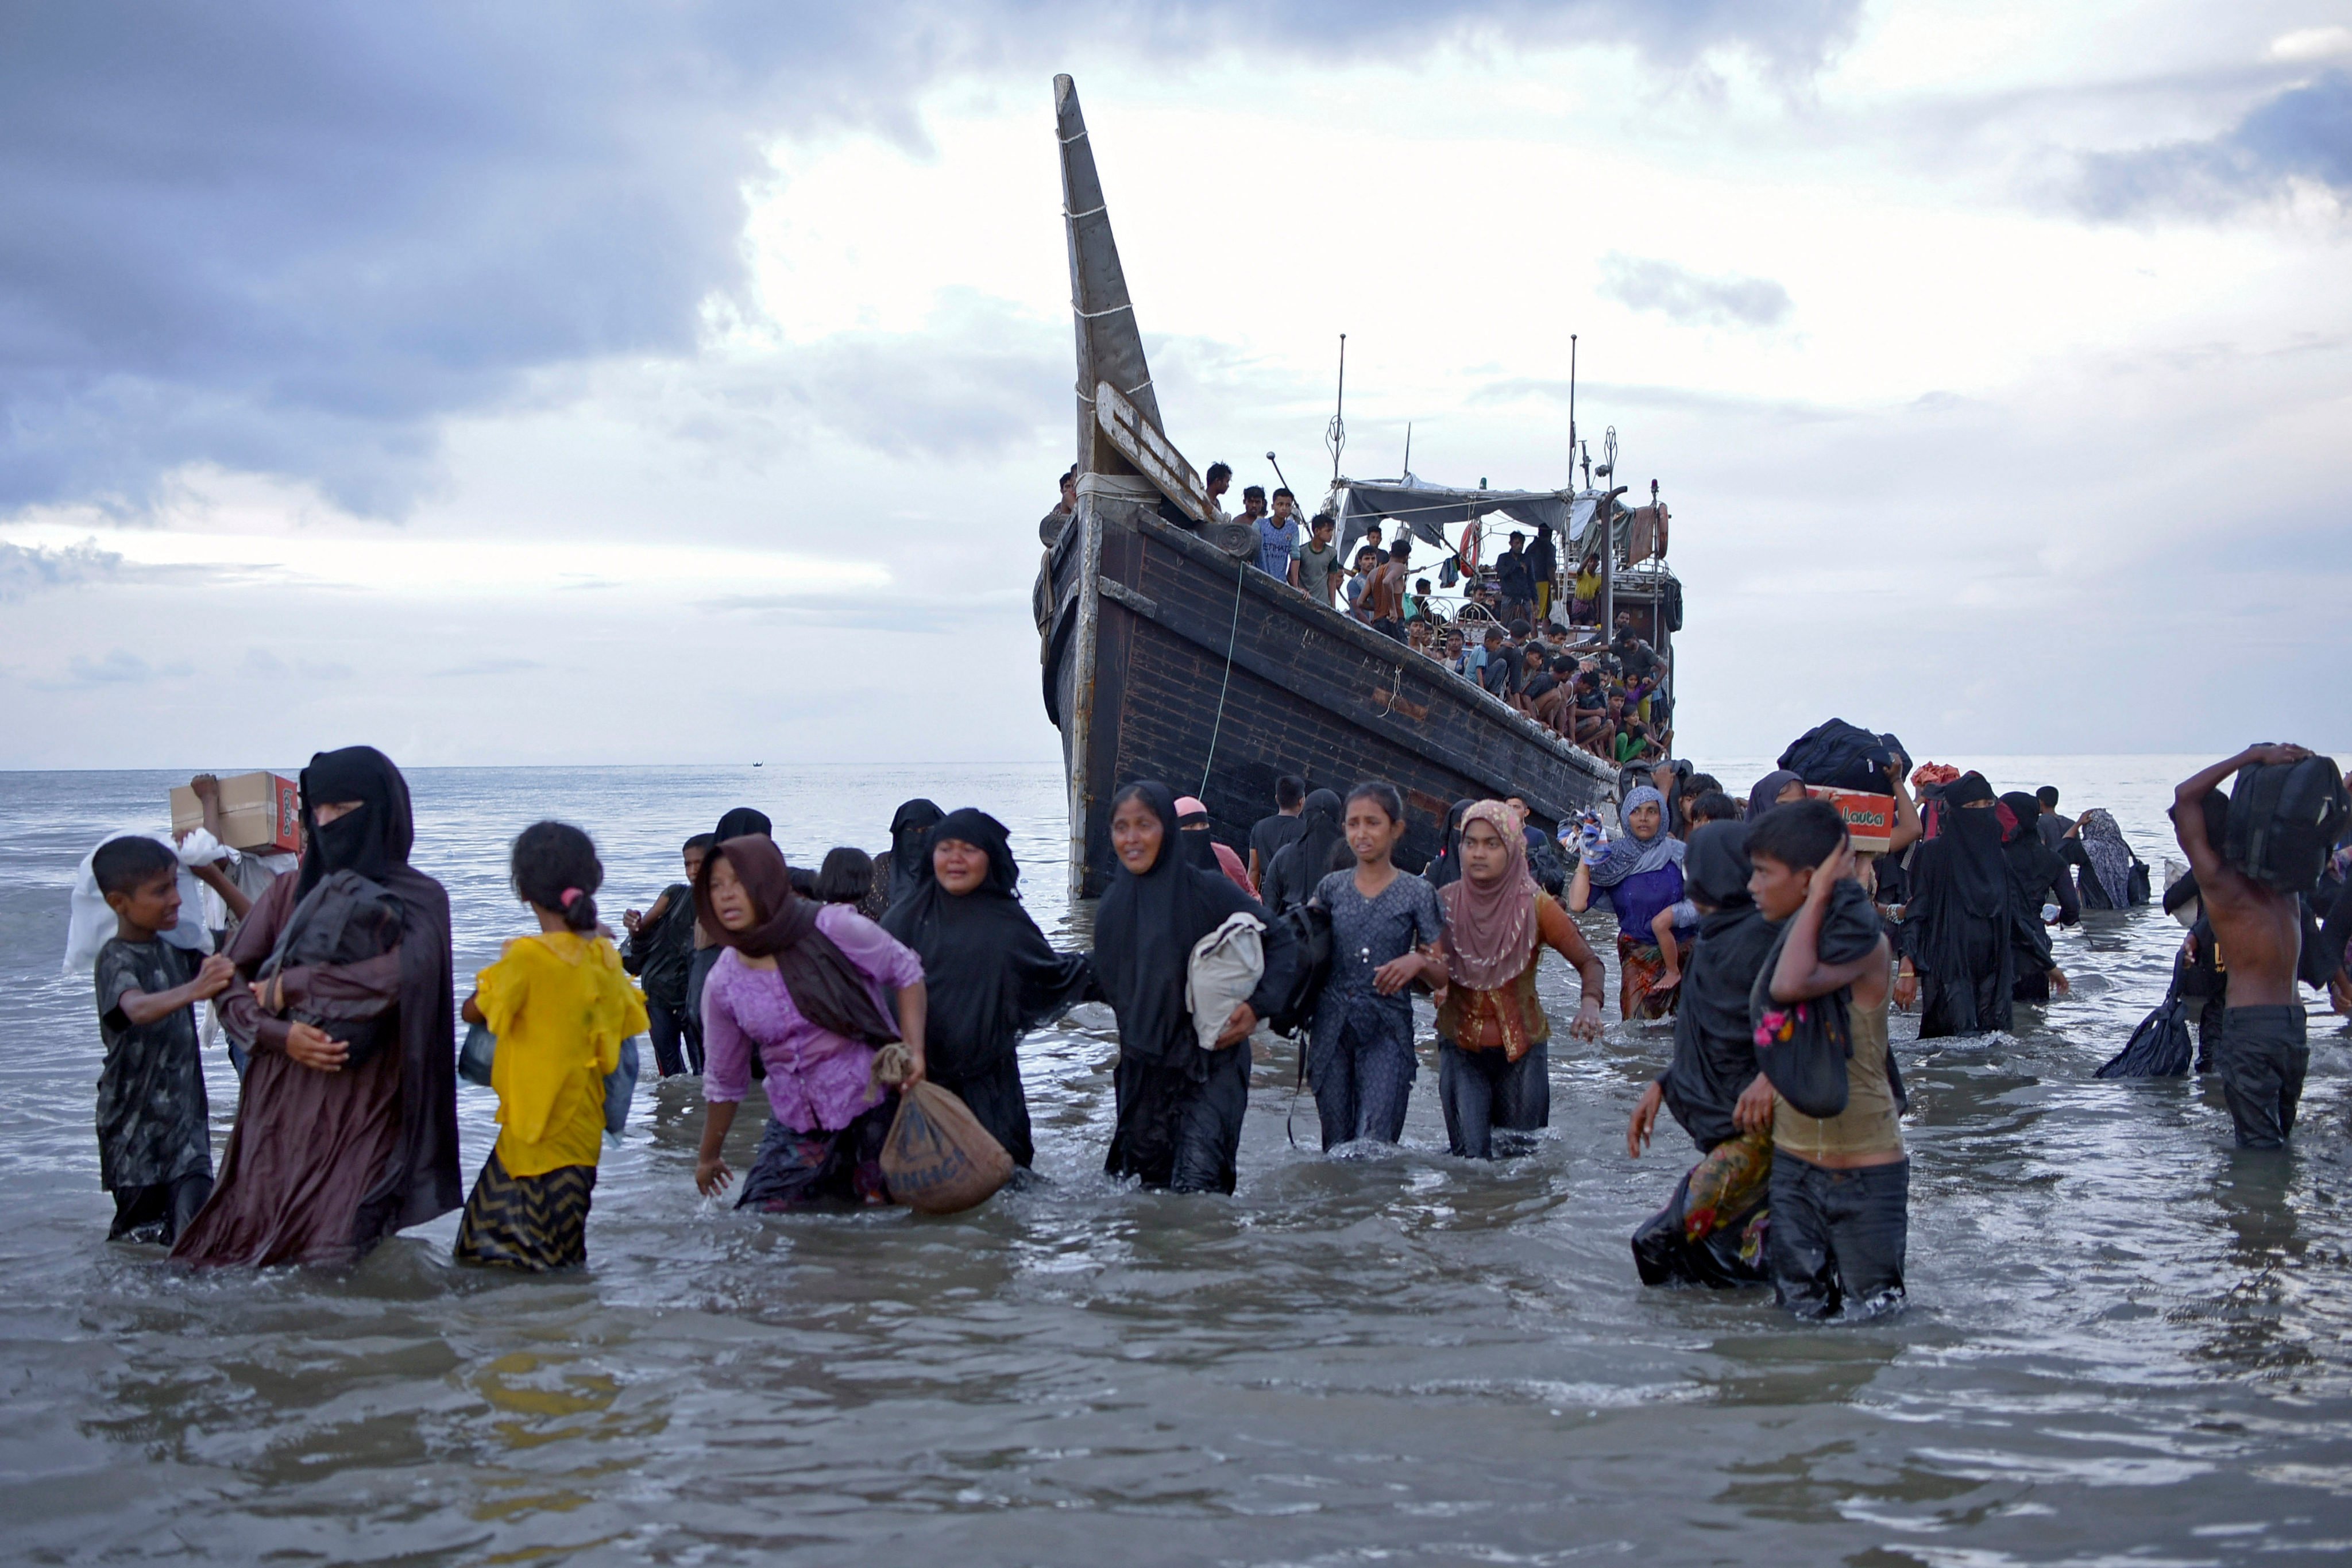 Rohingya refugees disembark from a boat upon landing in Indonesia’s Aceh province in November. More than 1,500 Rohingya Muslims have arrived in the province in recent weeks. Photo: AP